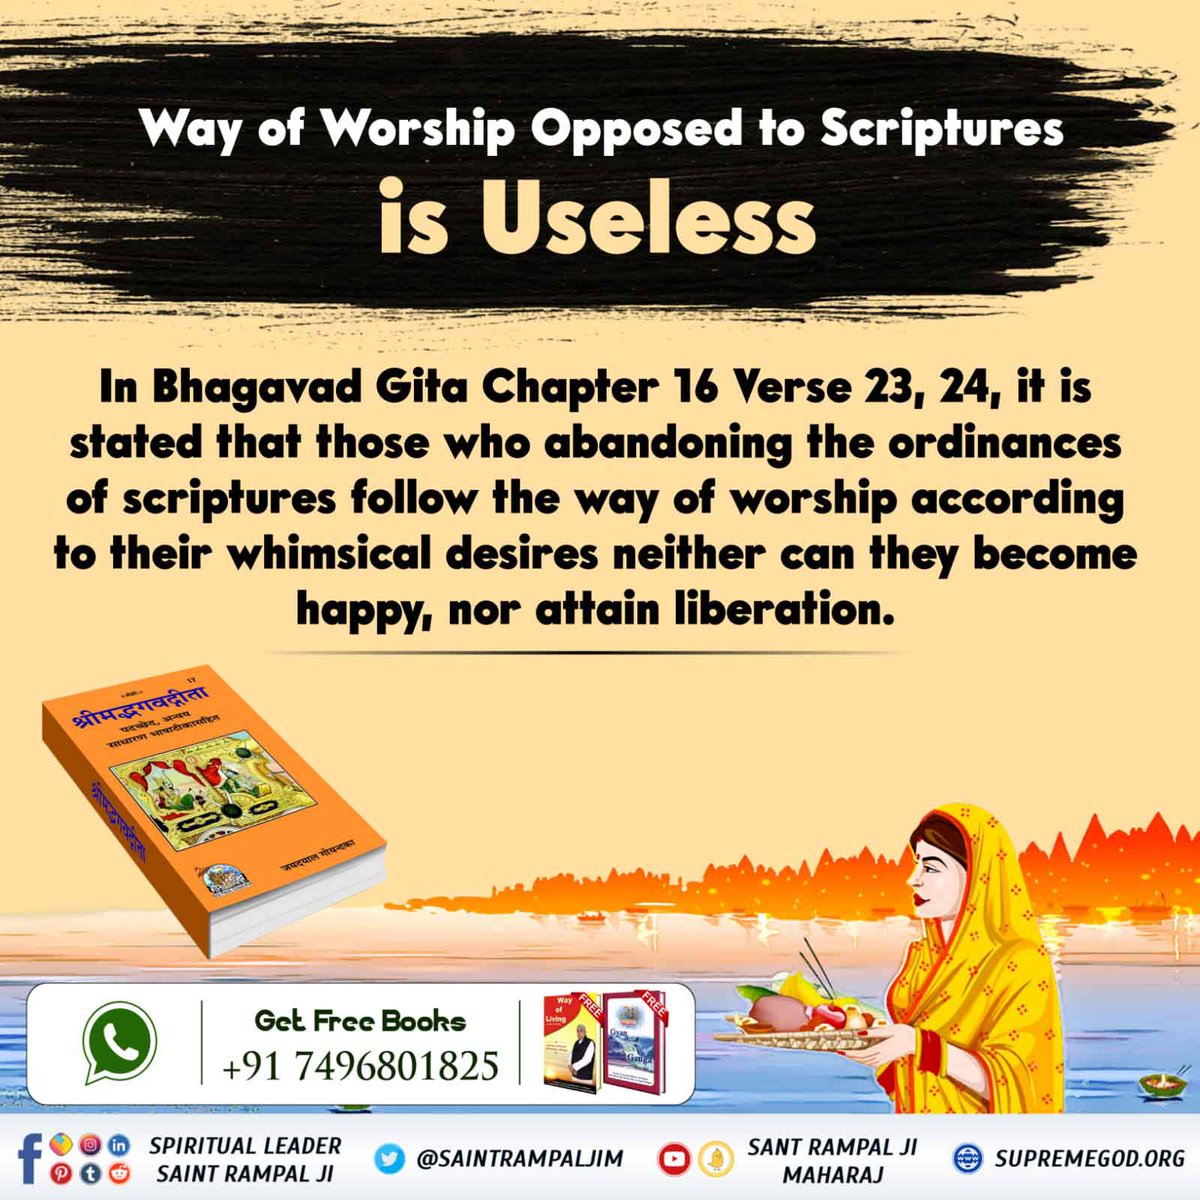 #GodMorningMondey Know why any fast keeping or vrata is useless in holy Bhagat Geeta ji For knowing reality Read precious book (get free through sms) Gyan Ganga. More information download our official app sant Rampalji Maharaj from play store @SaintRampalJiM